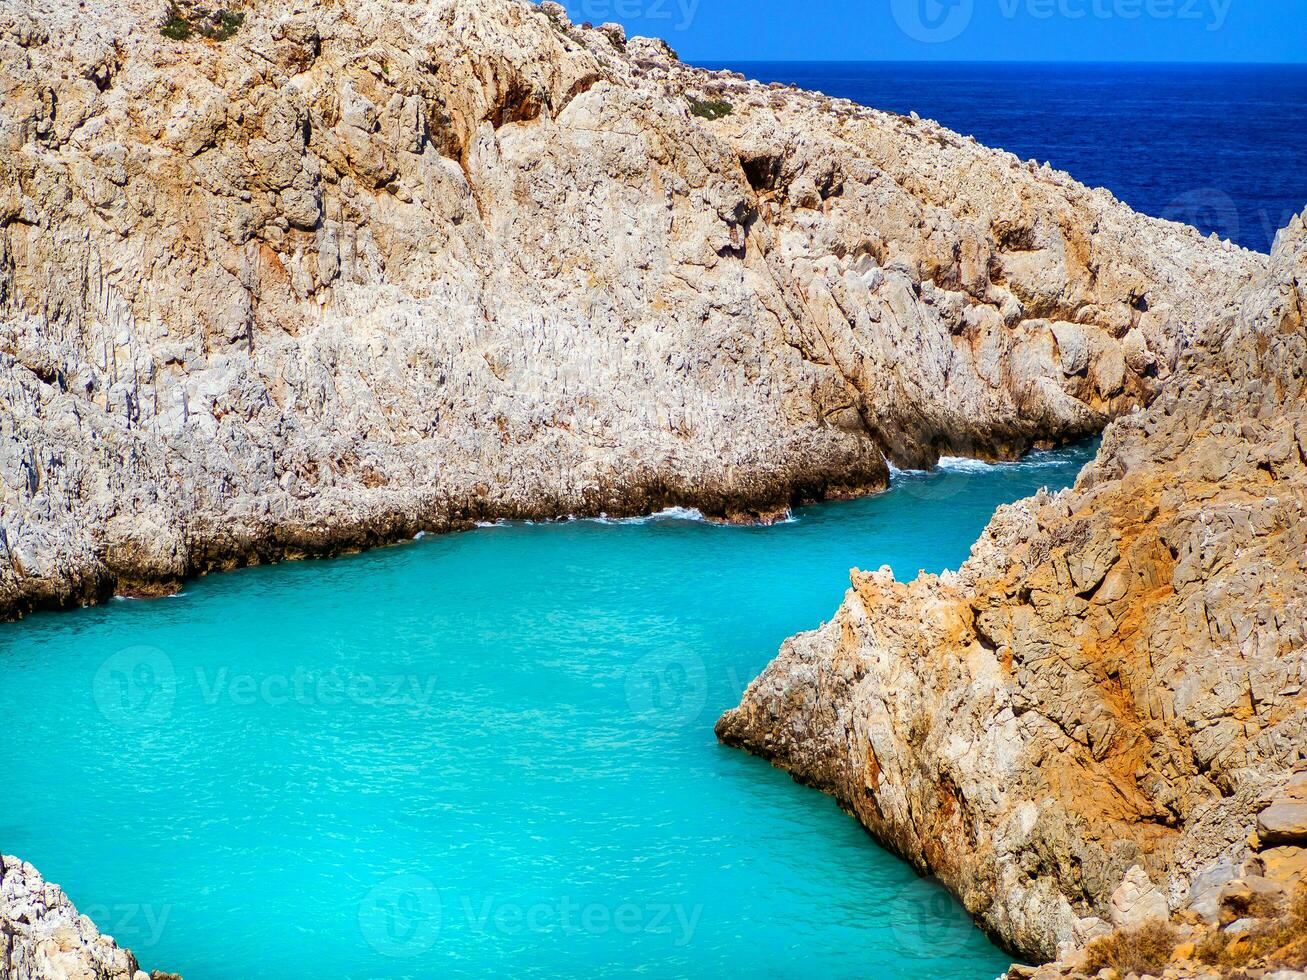 Amazing bright blue water in a secluded cove with orange cliffs surrounding it - Crete, Greece photo